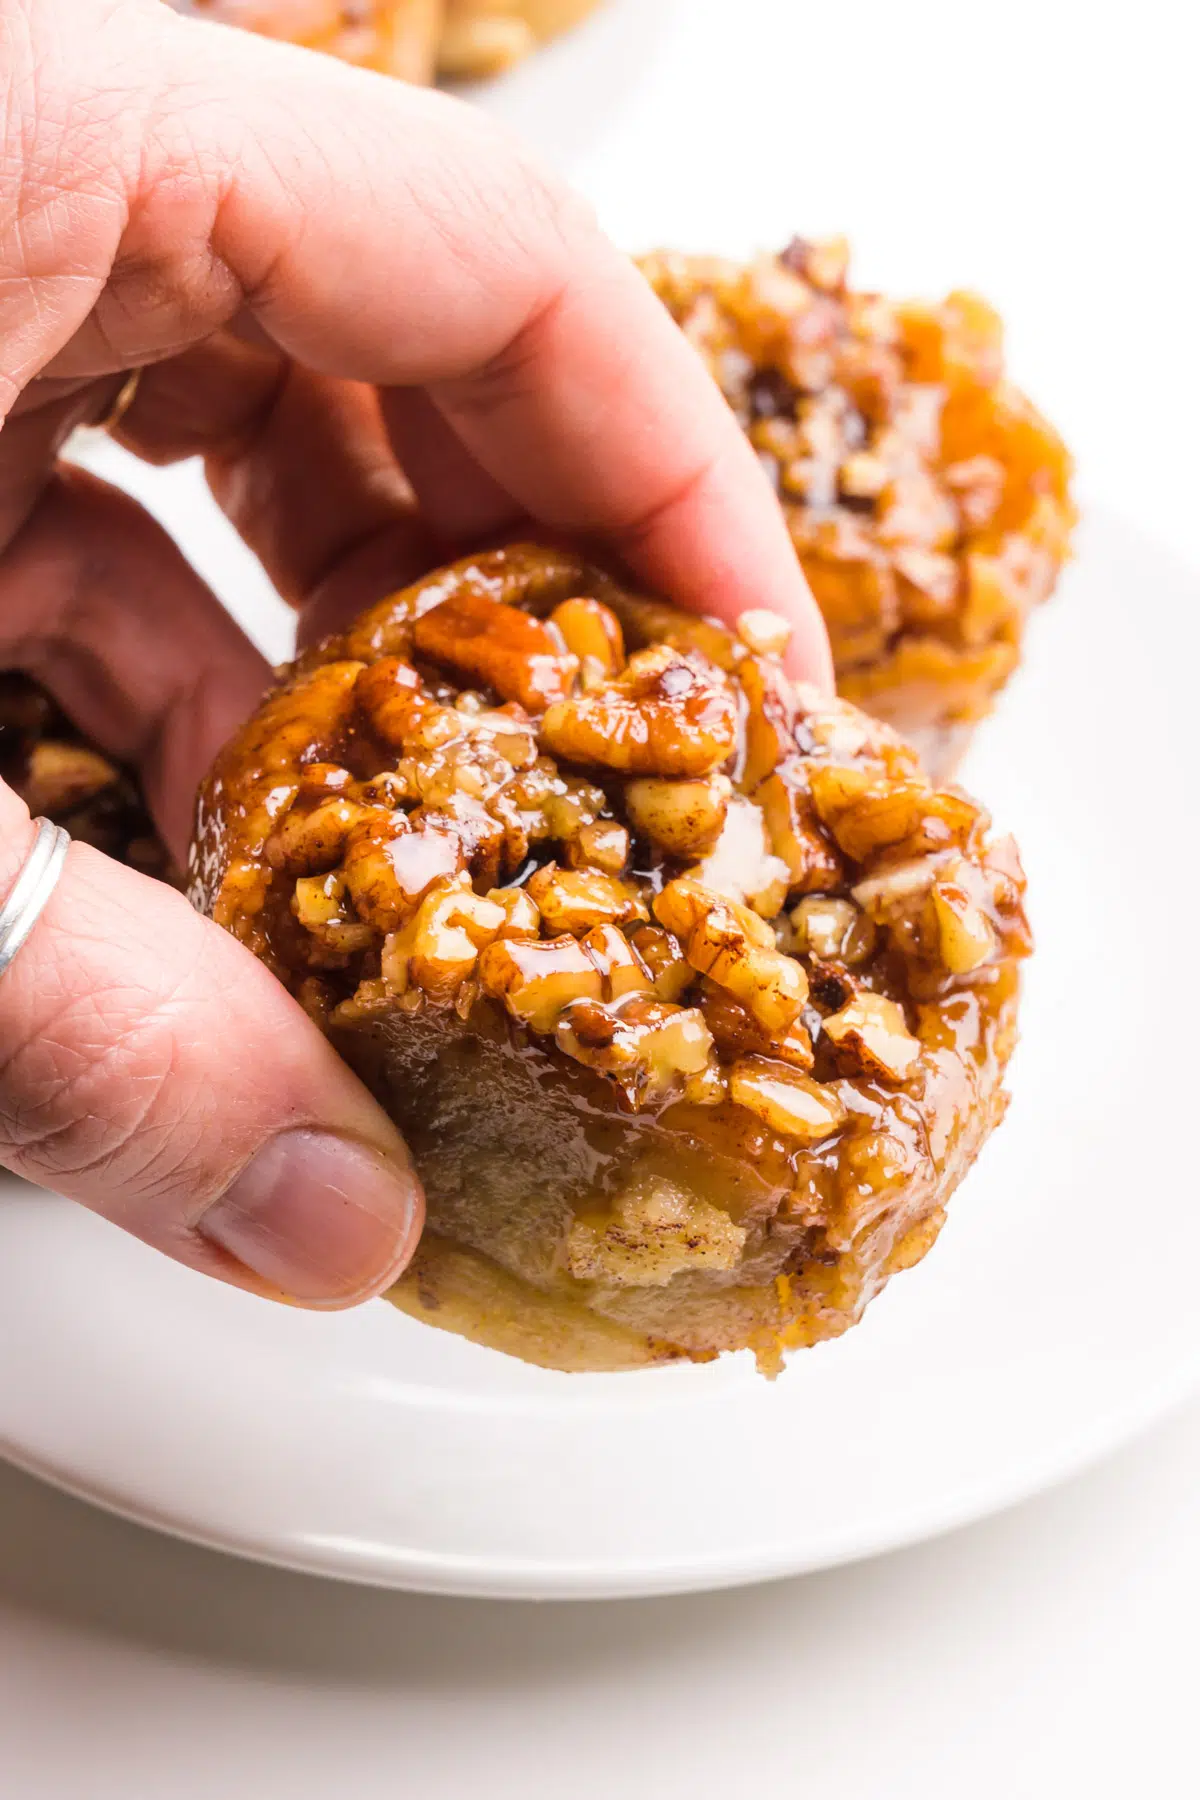 A hand holds a gluten-free sticky bun hovering over a plate with more of them.